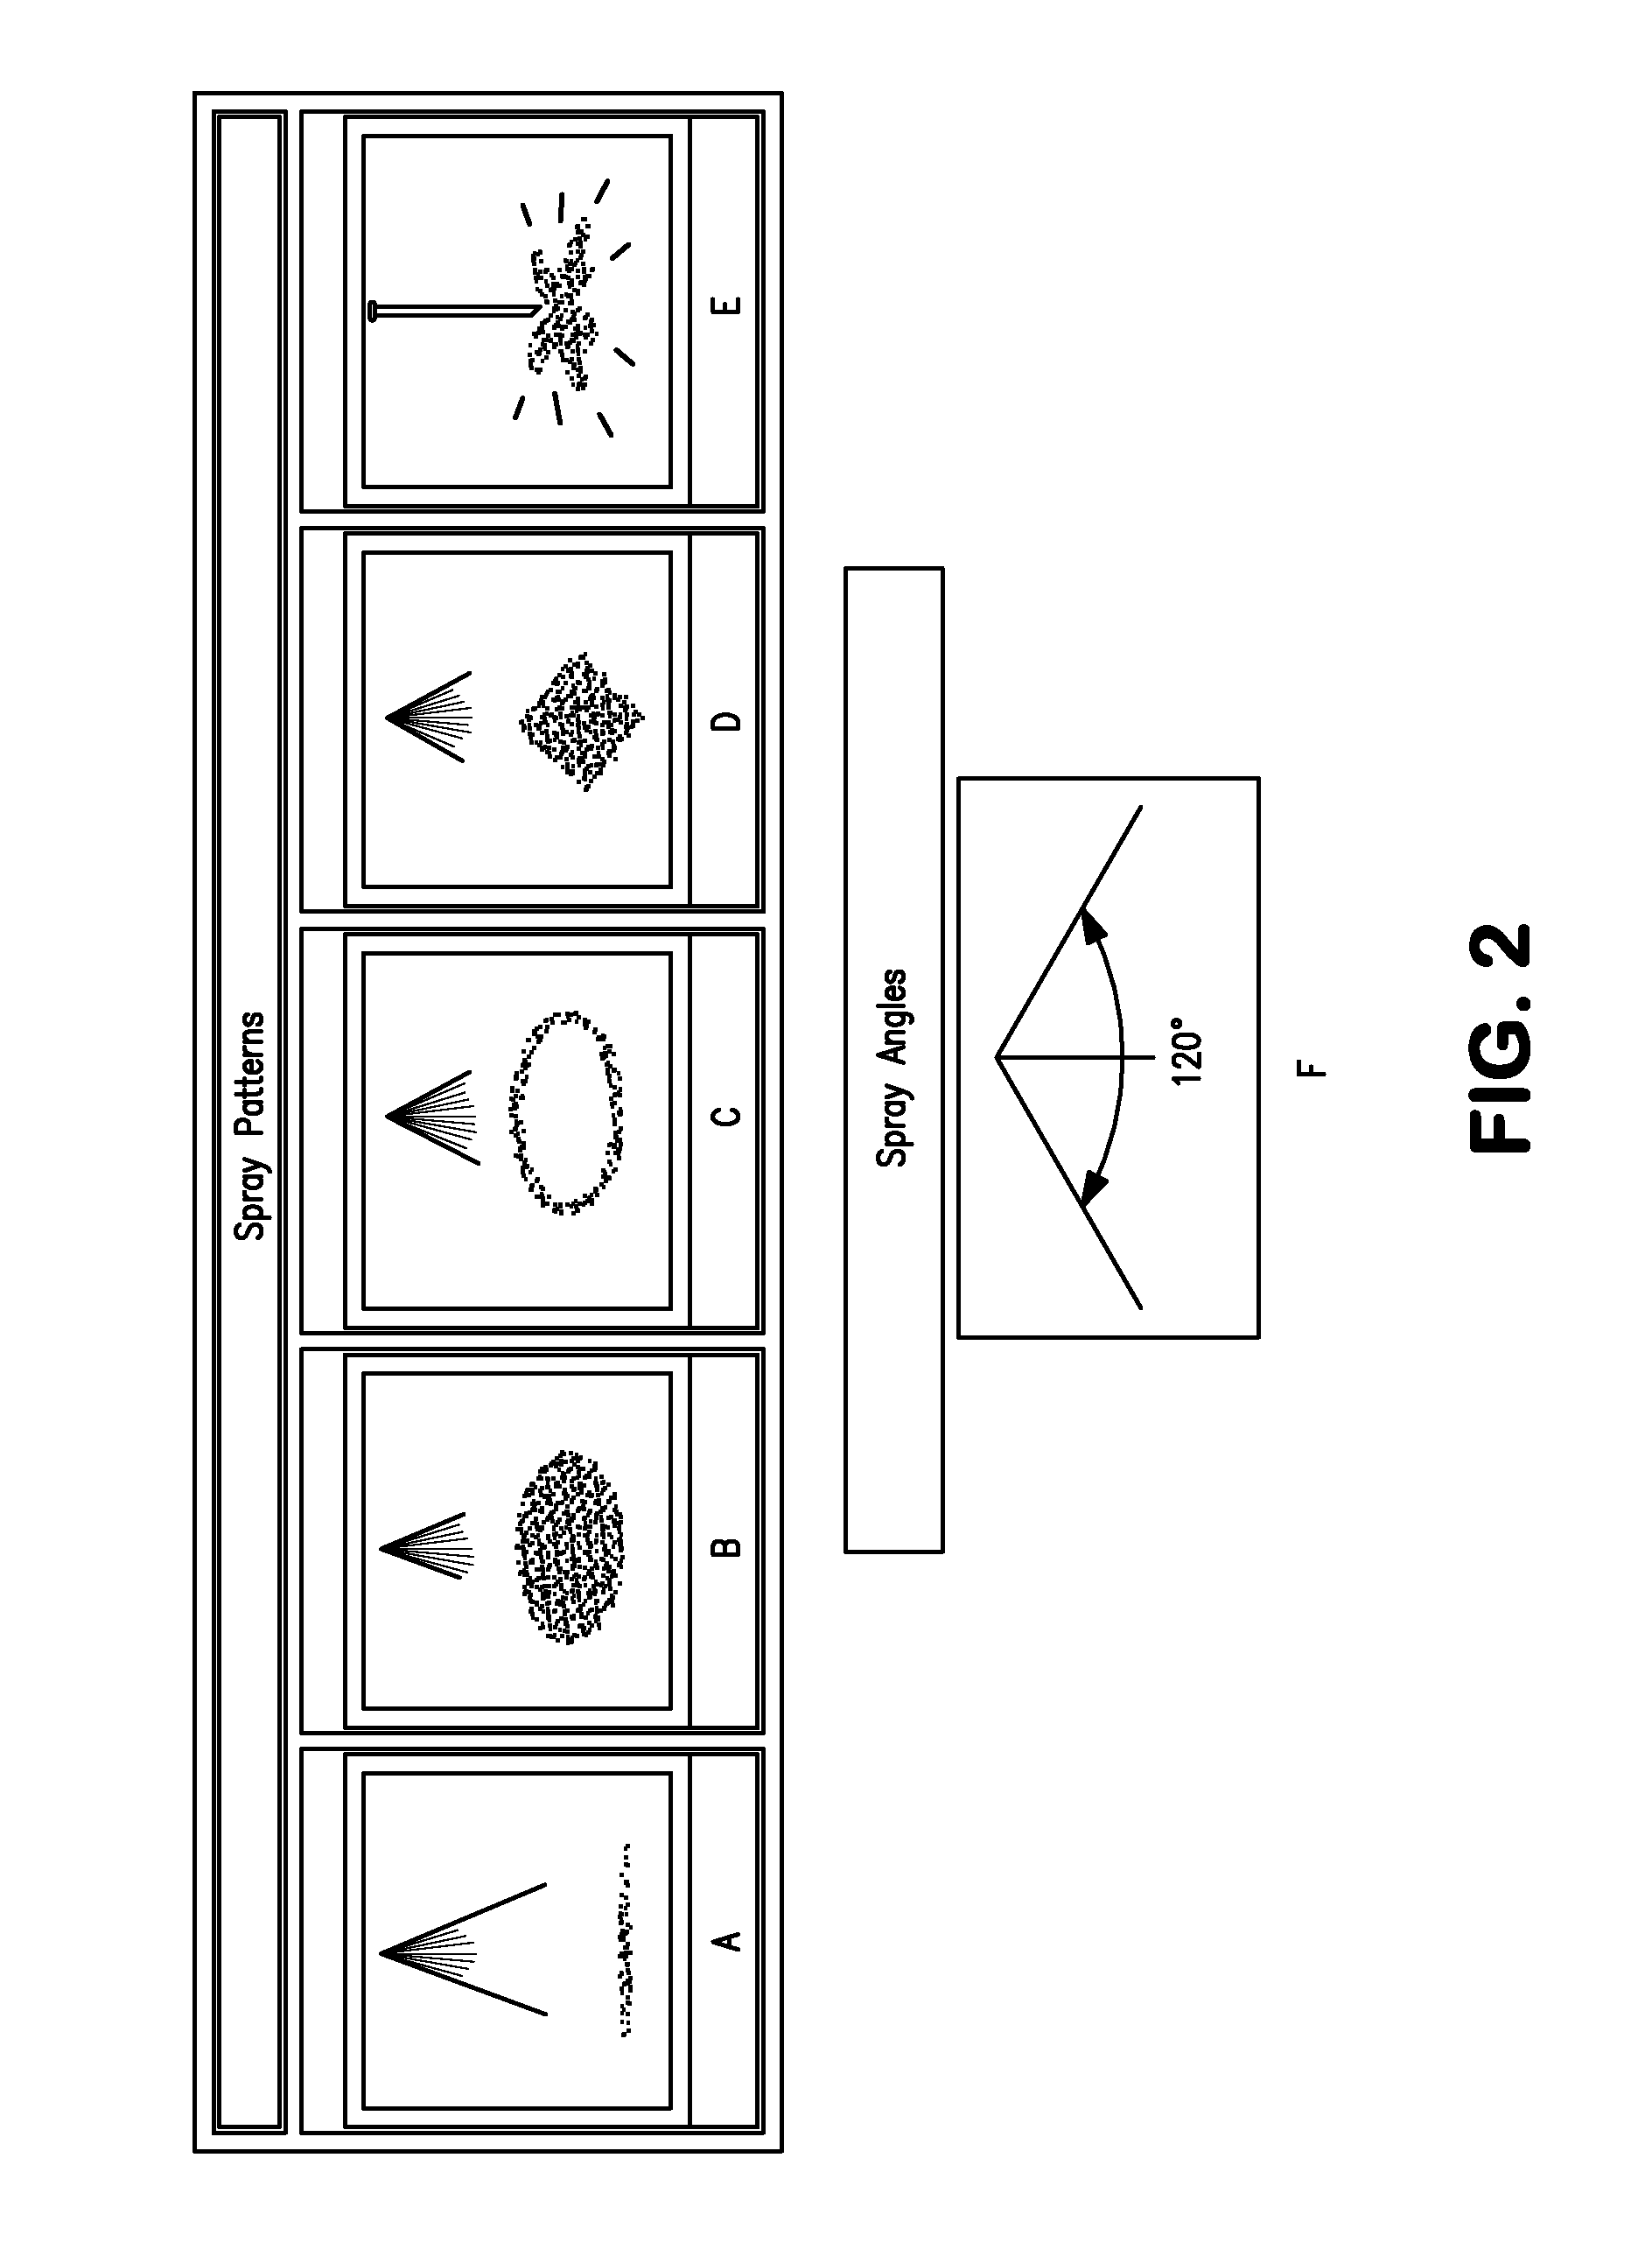 Self-cleaning wiresaw apparatus and method